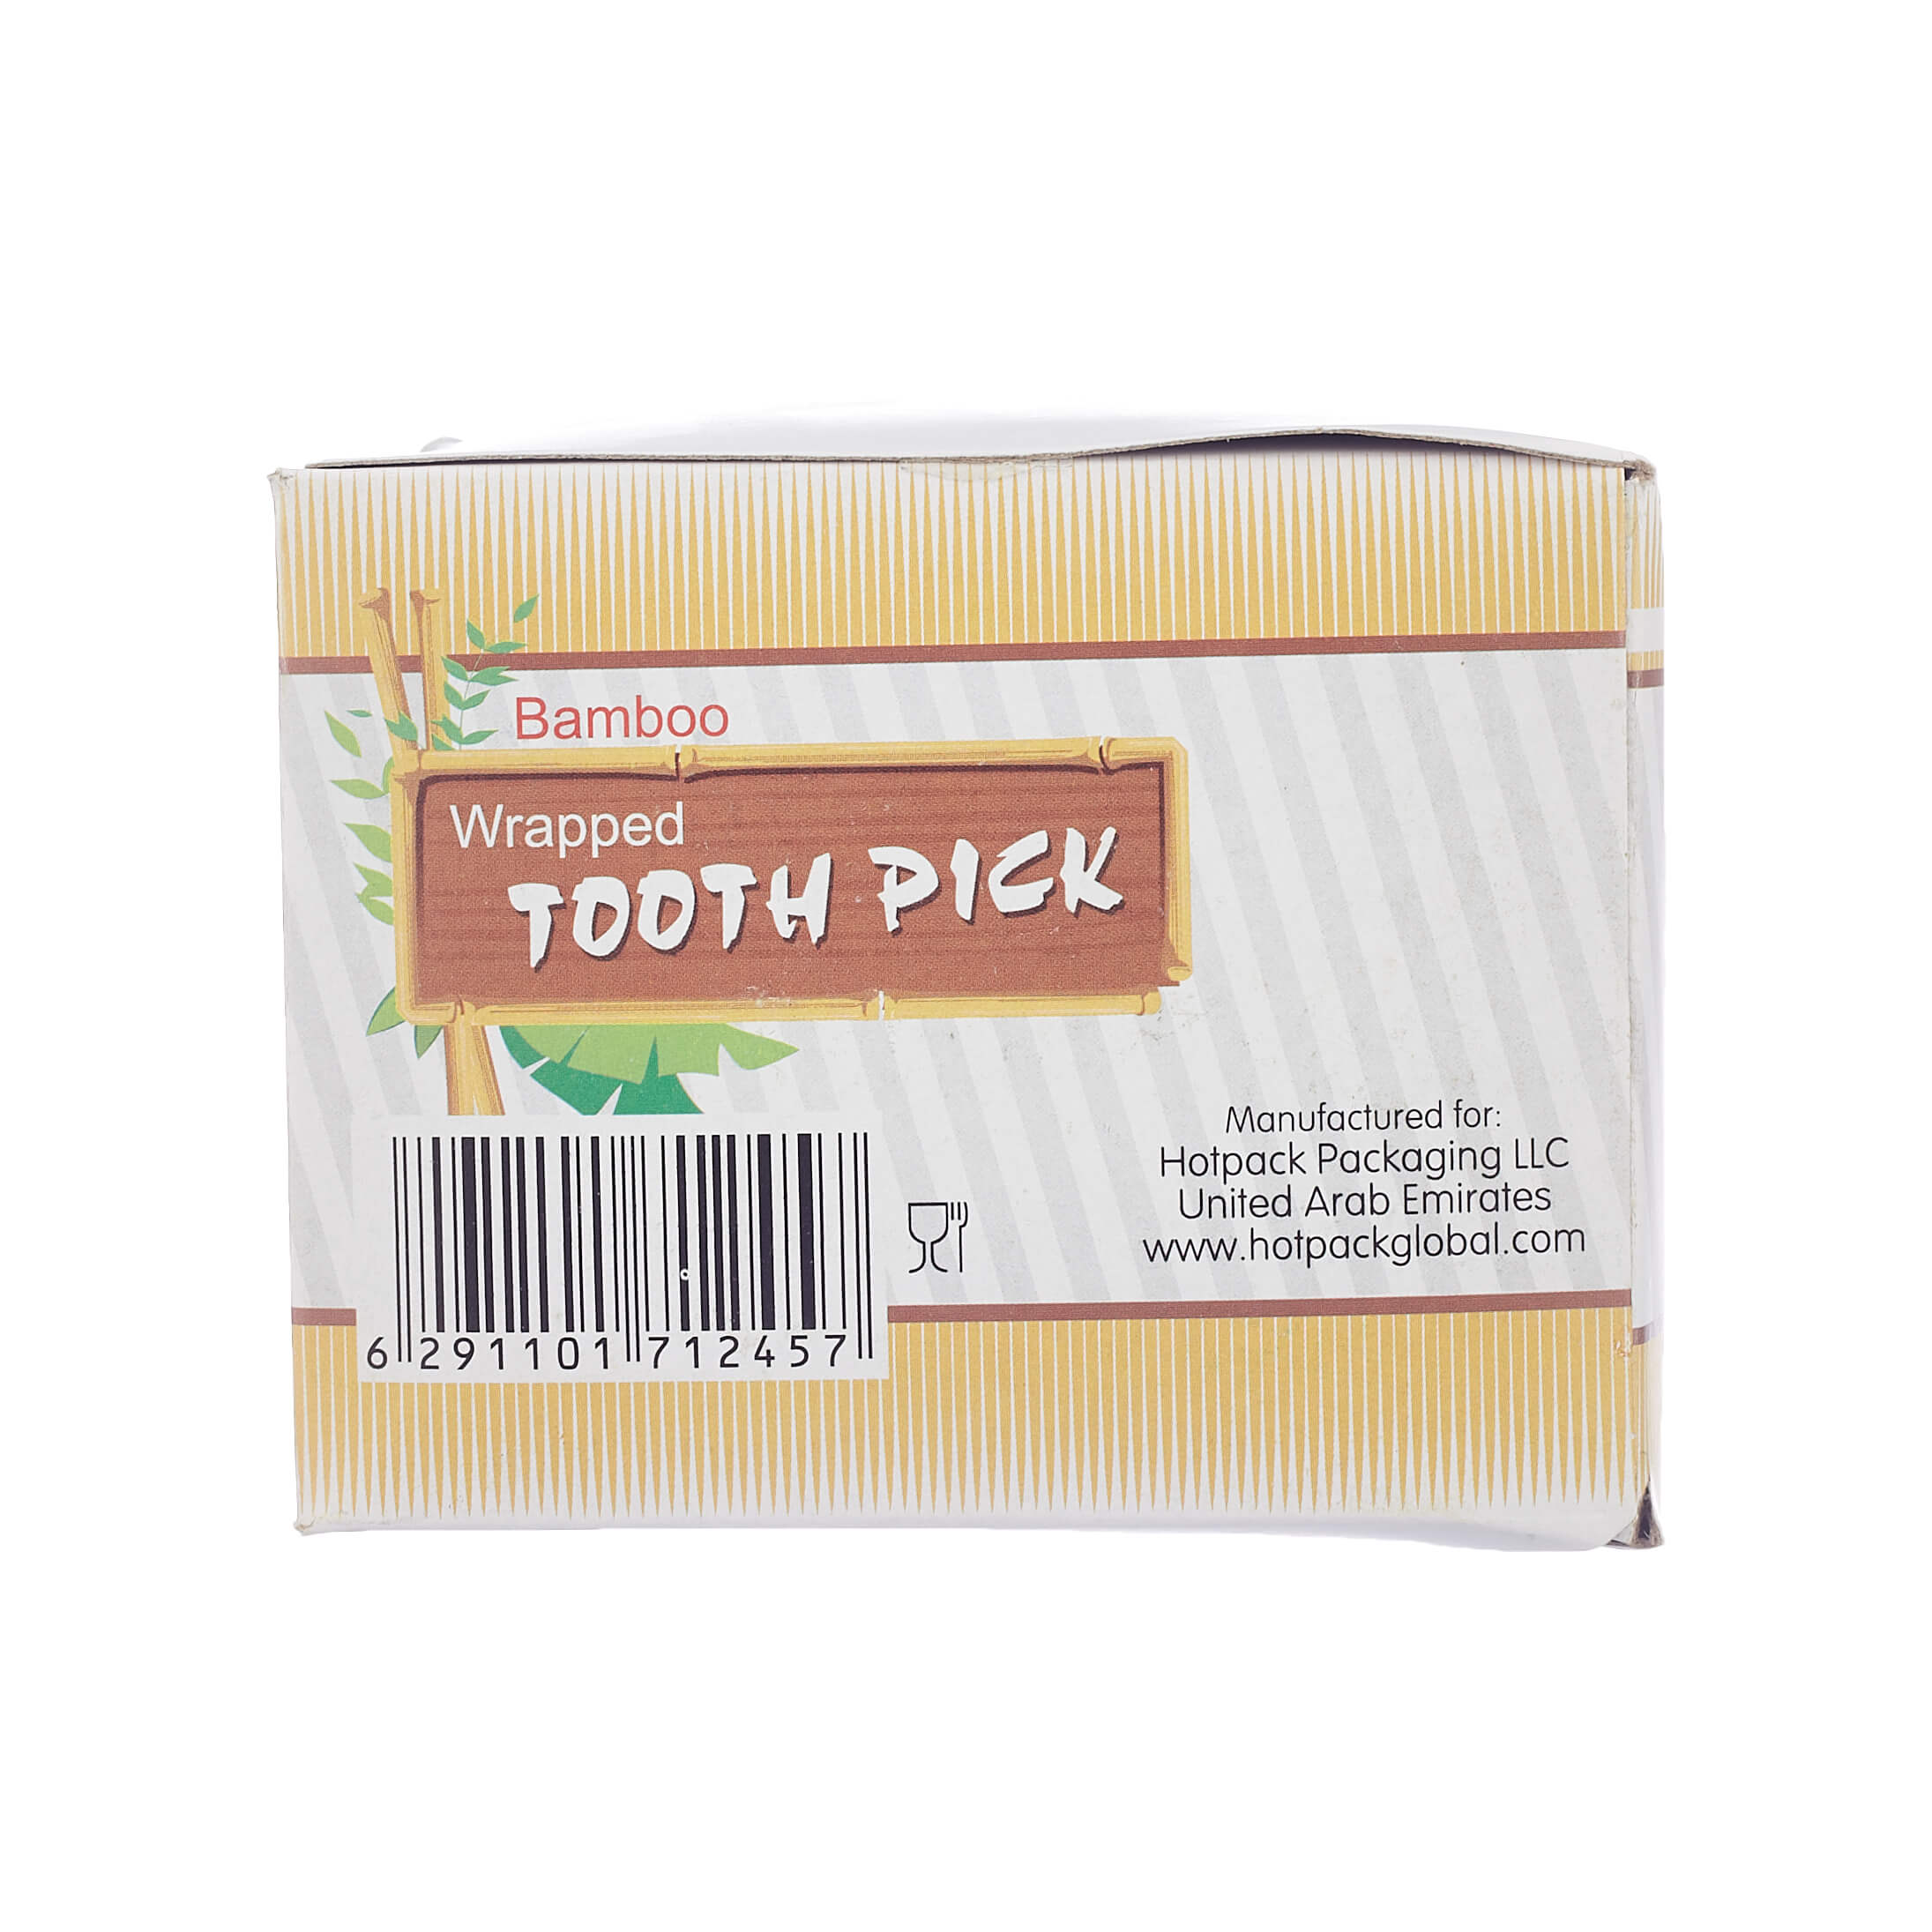 Wrapped Tooth Pick - Hotpack UAE